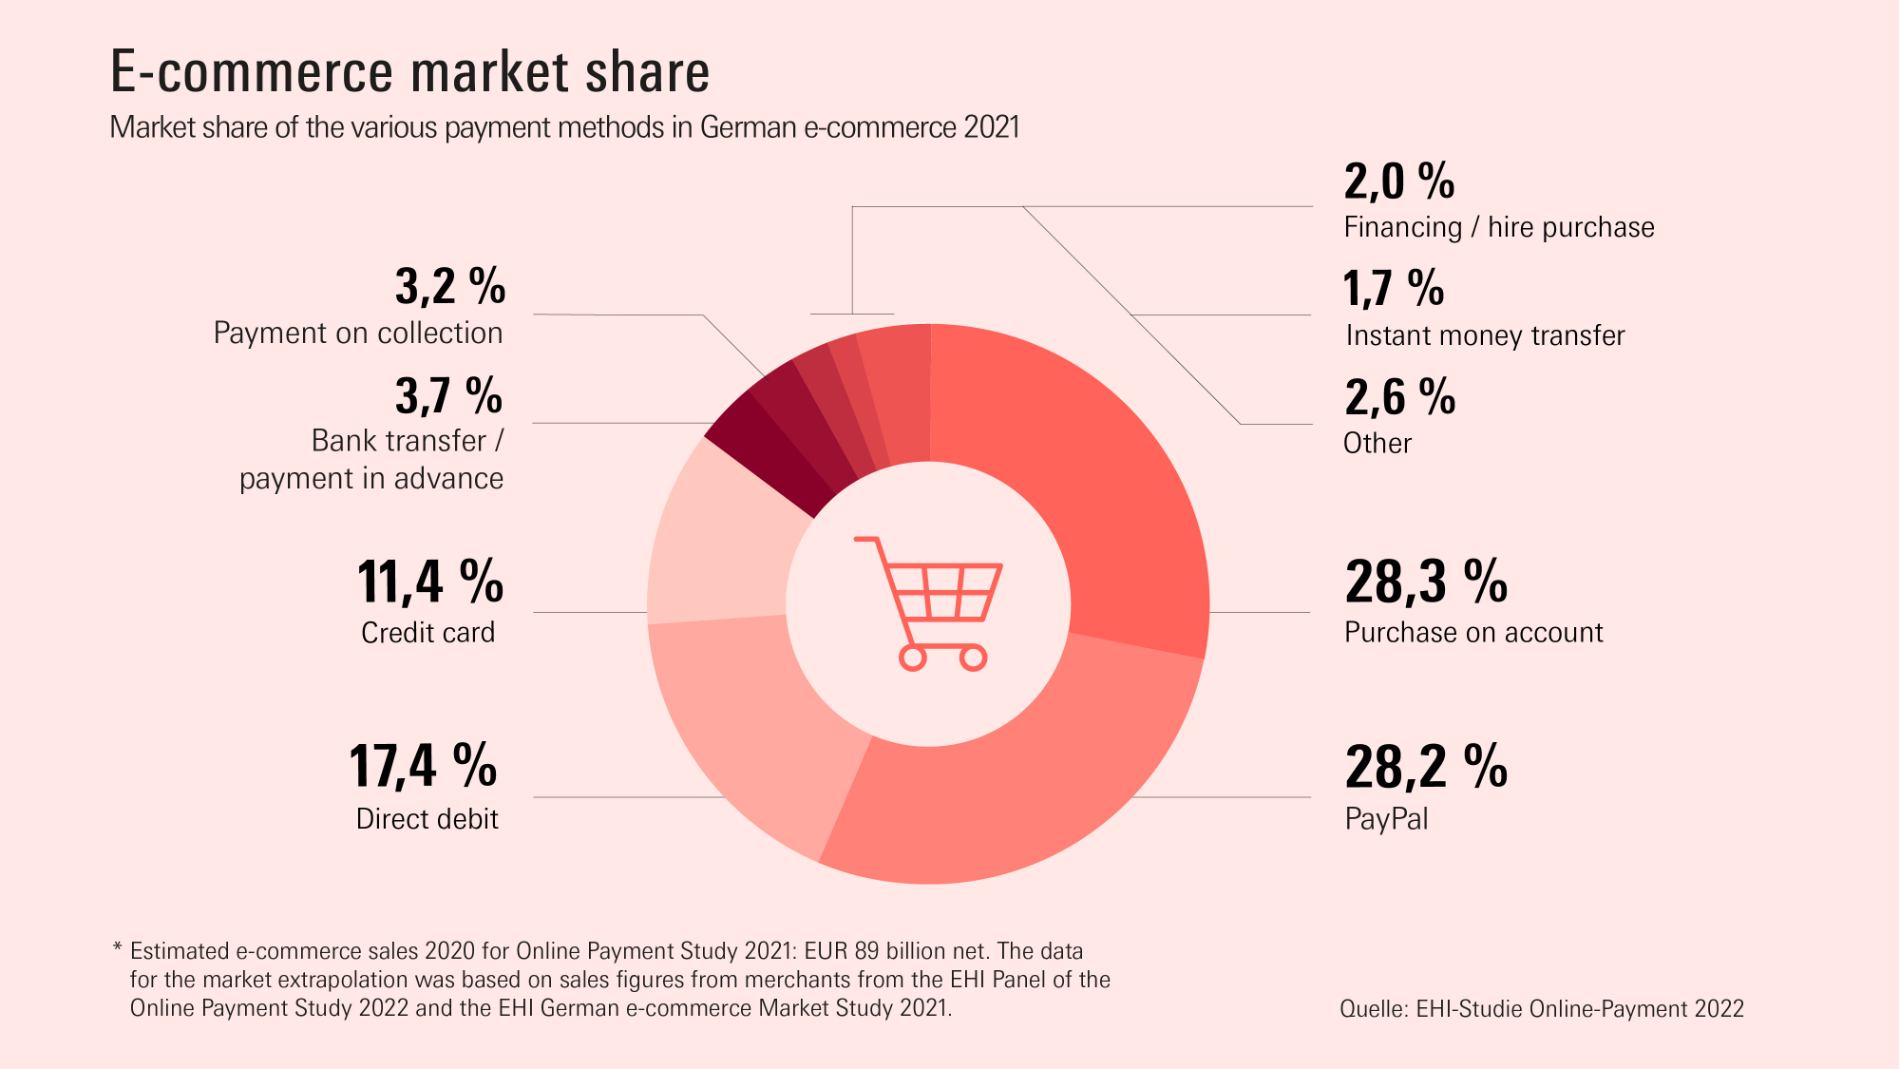 Market share of various payment methods